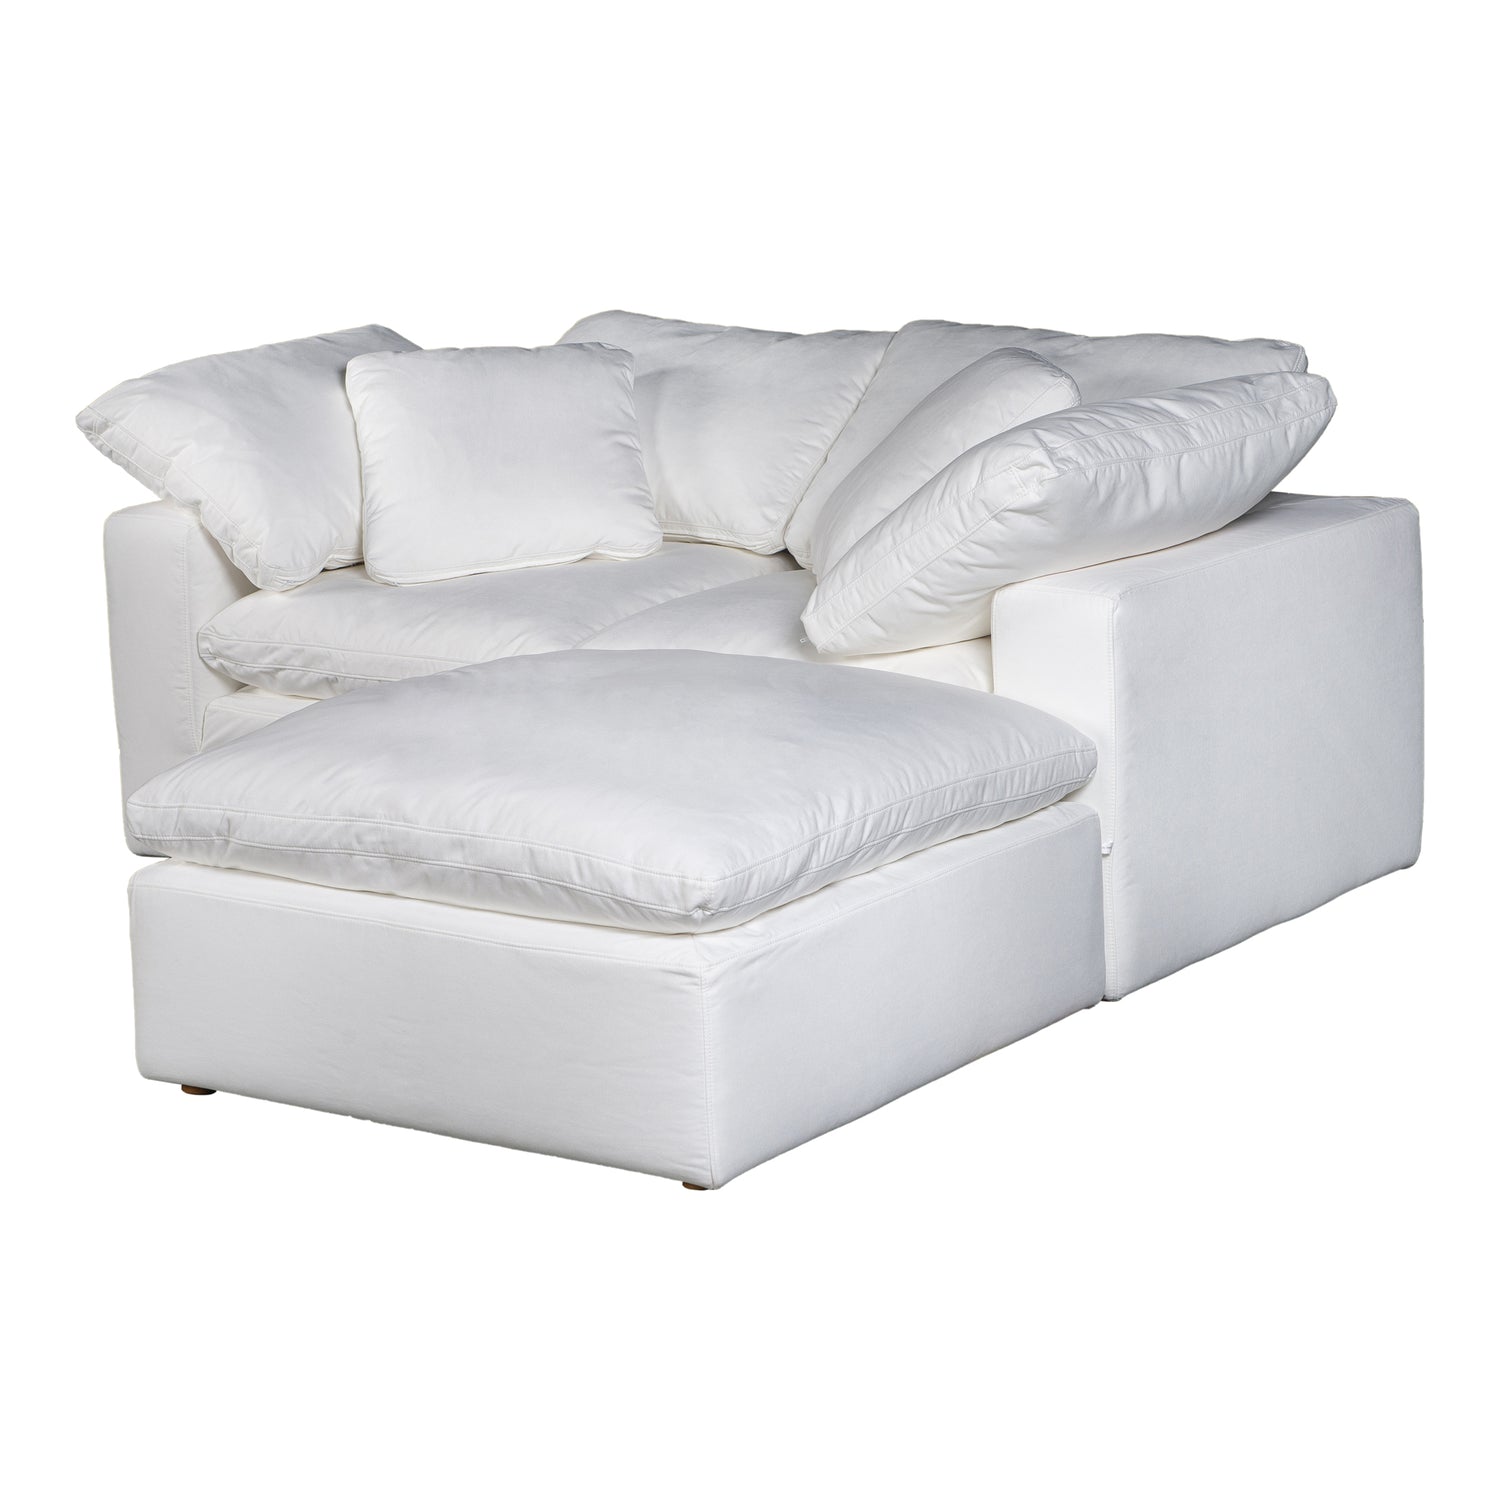 kloud-3-piece-modular-sectional-nook-white-comfy 